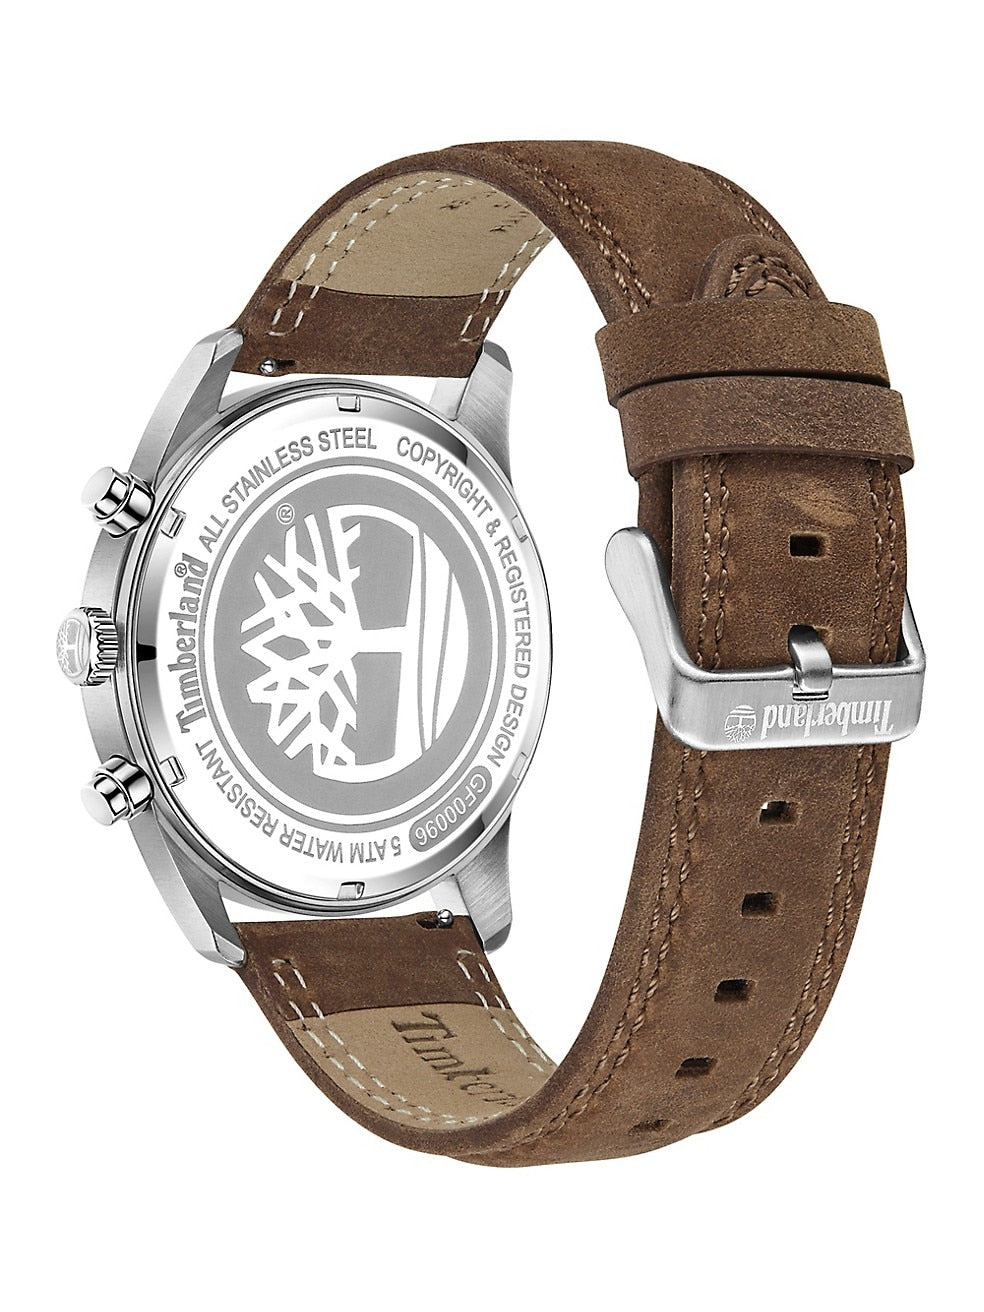 A Timberland Northbridge Stainless Steel & Leather Strap Chronograph Watch with a brown leather strap.